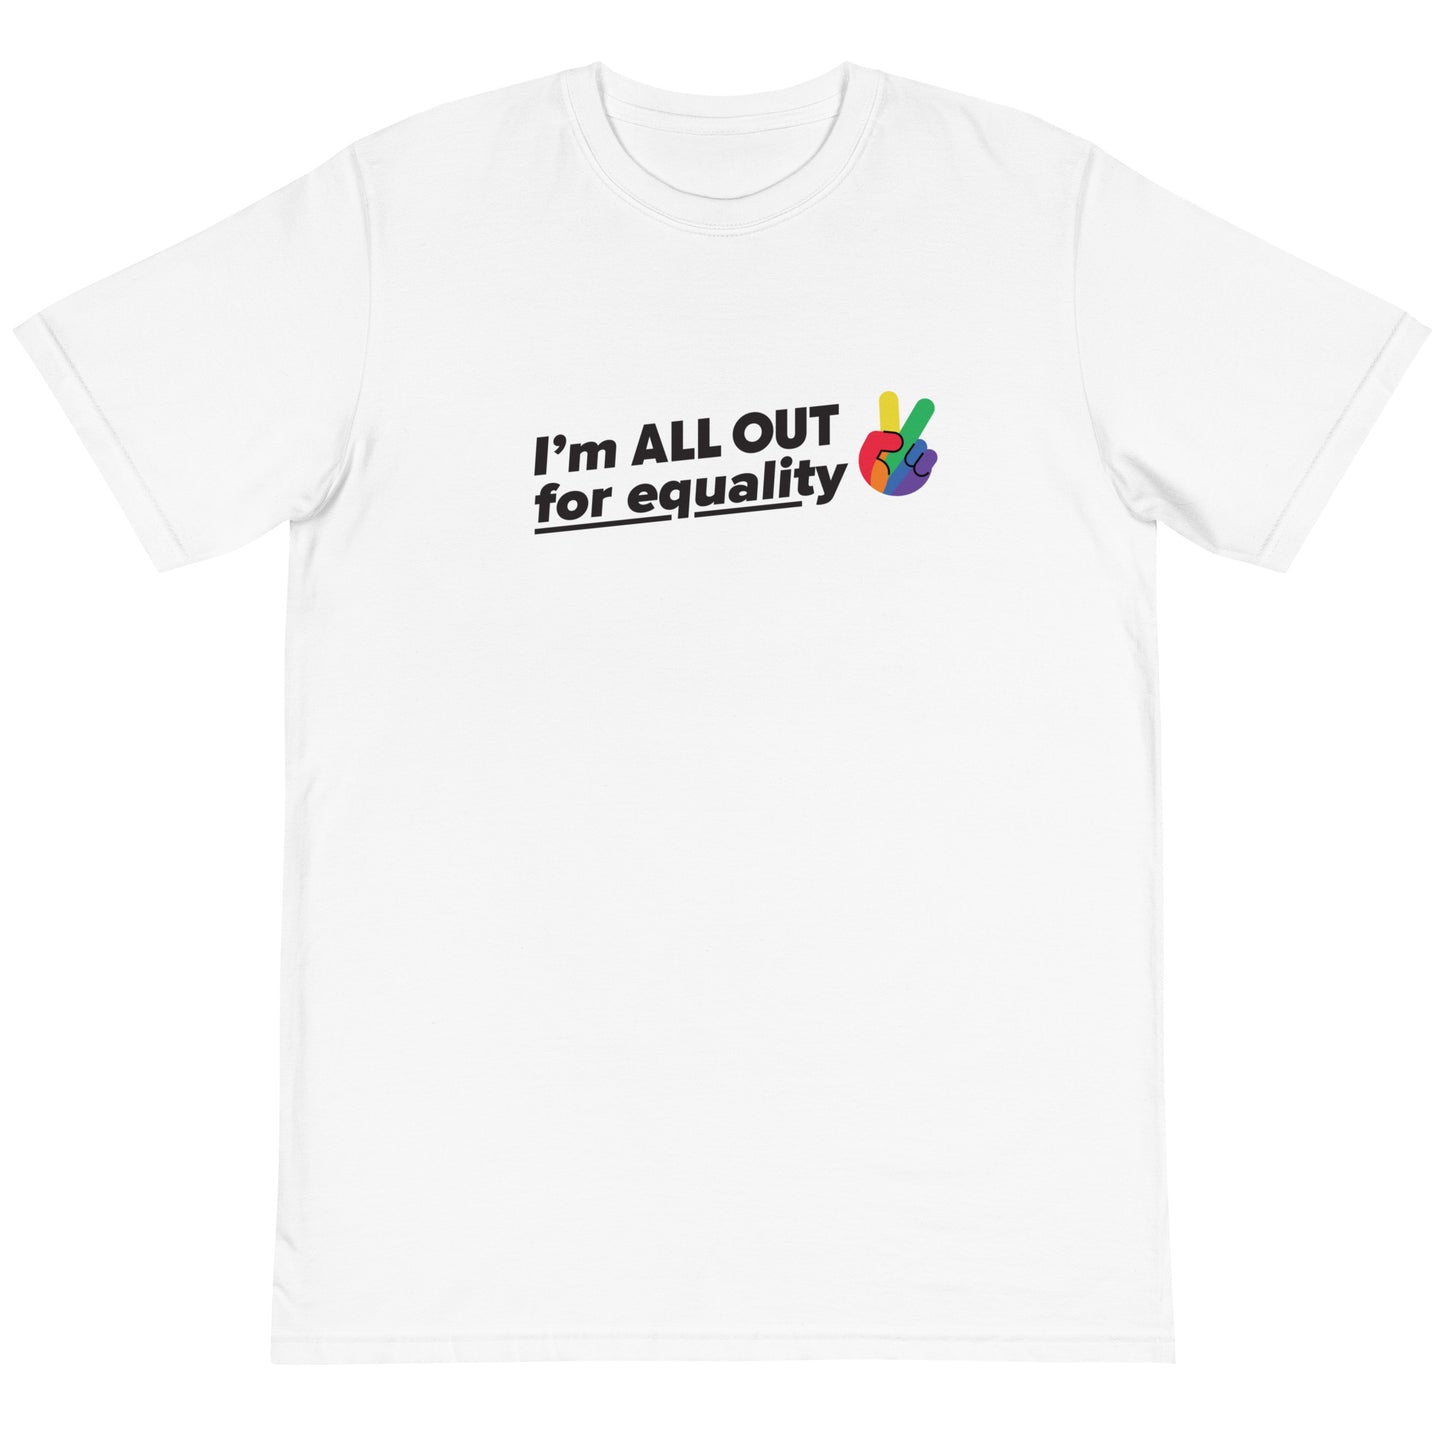 I'm All Out for Equality - Unisex T-Shirt